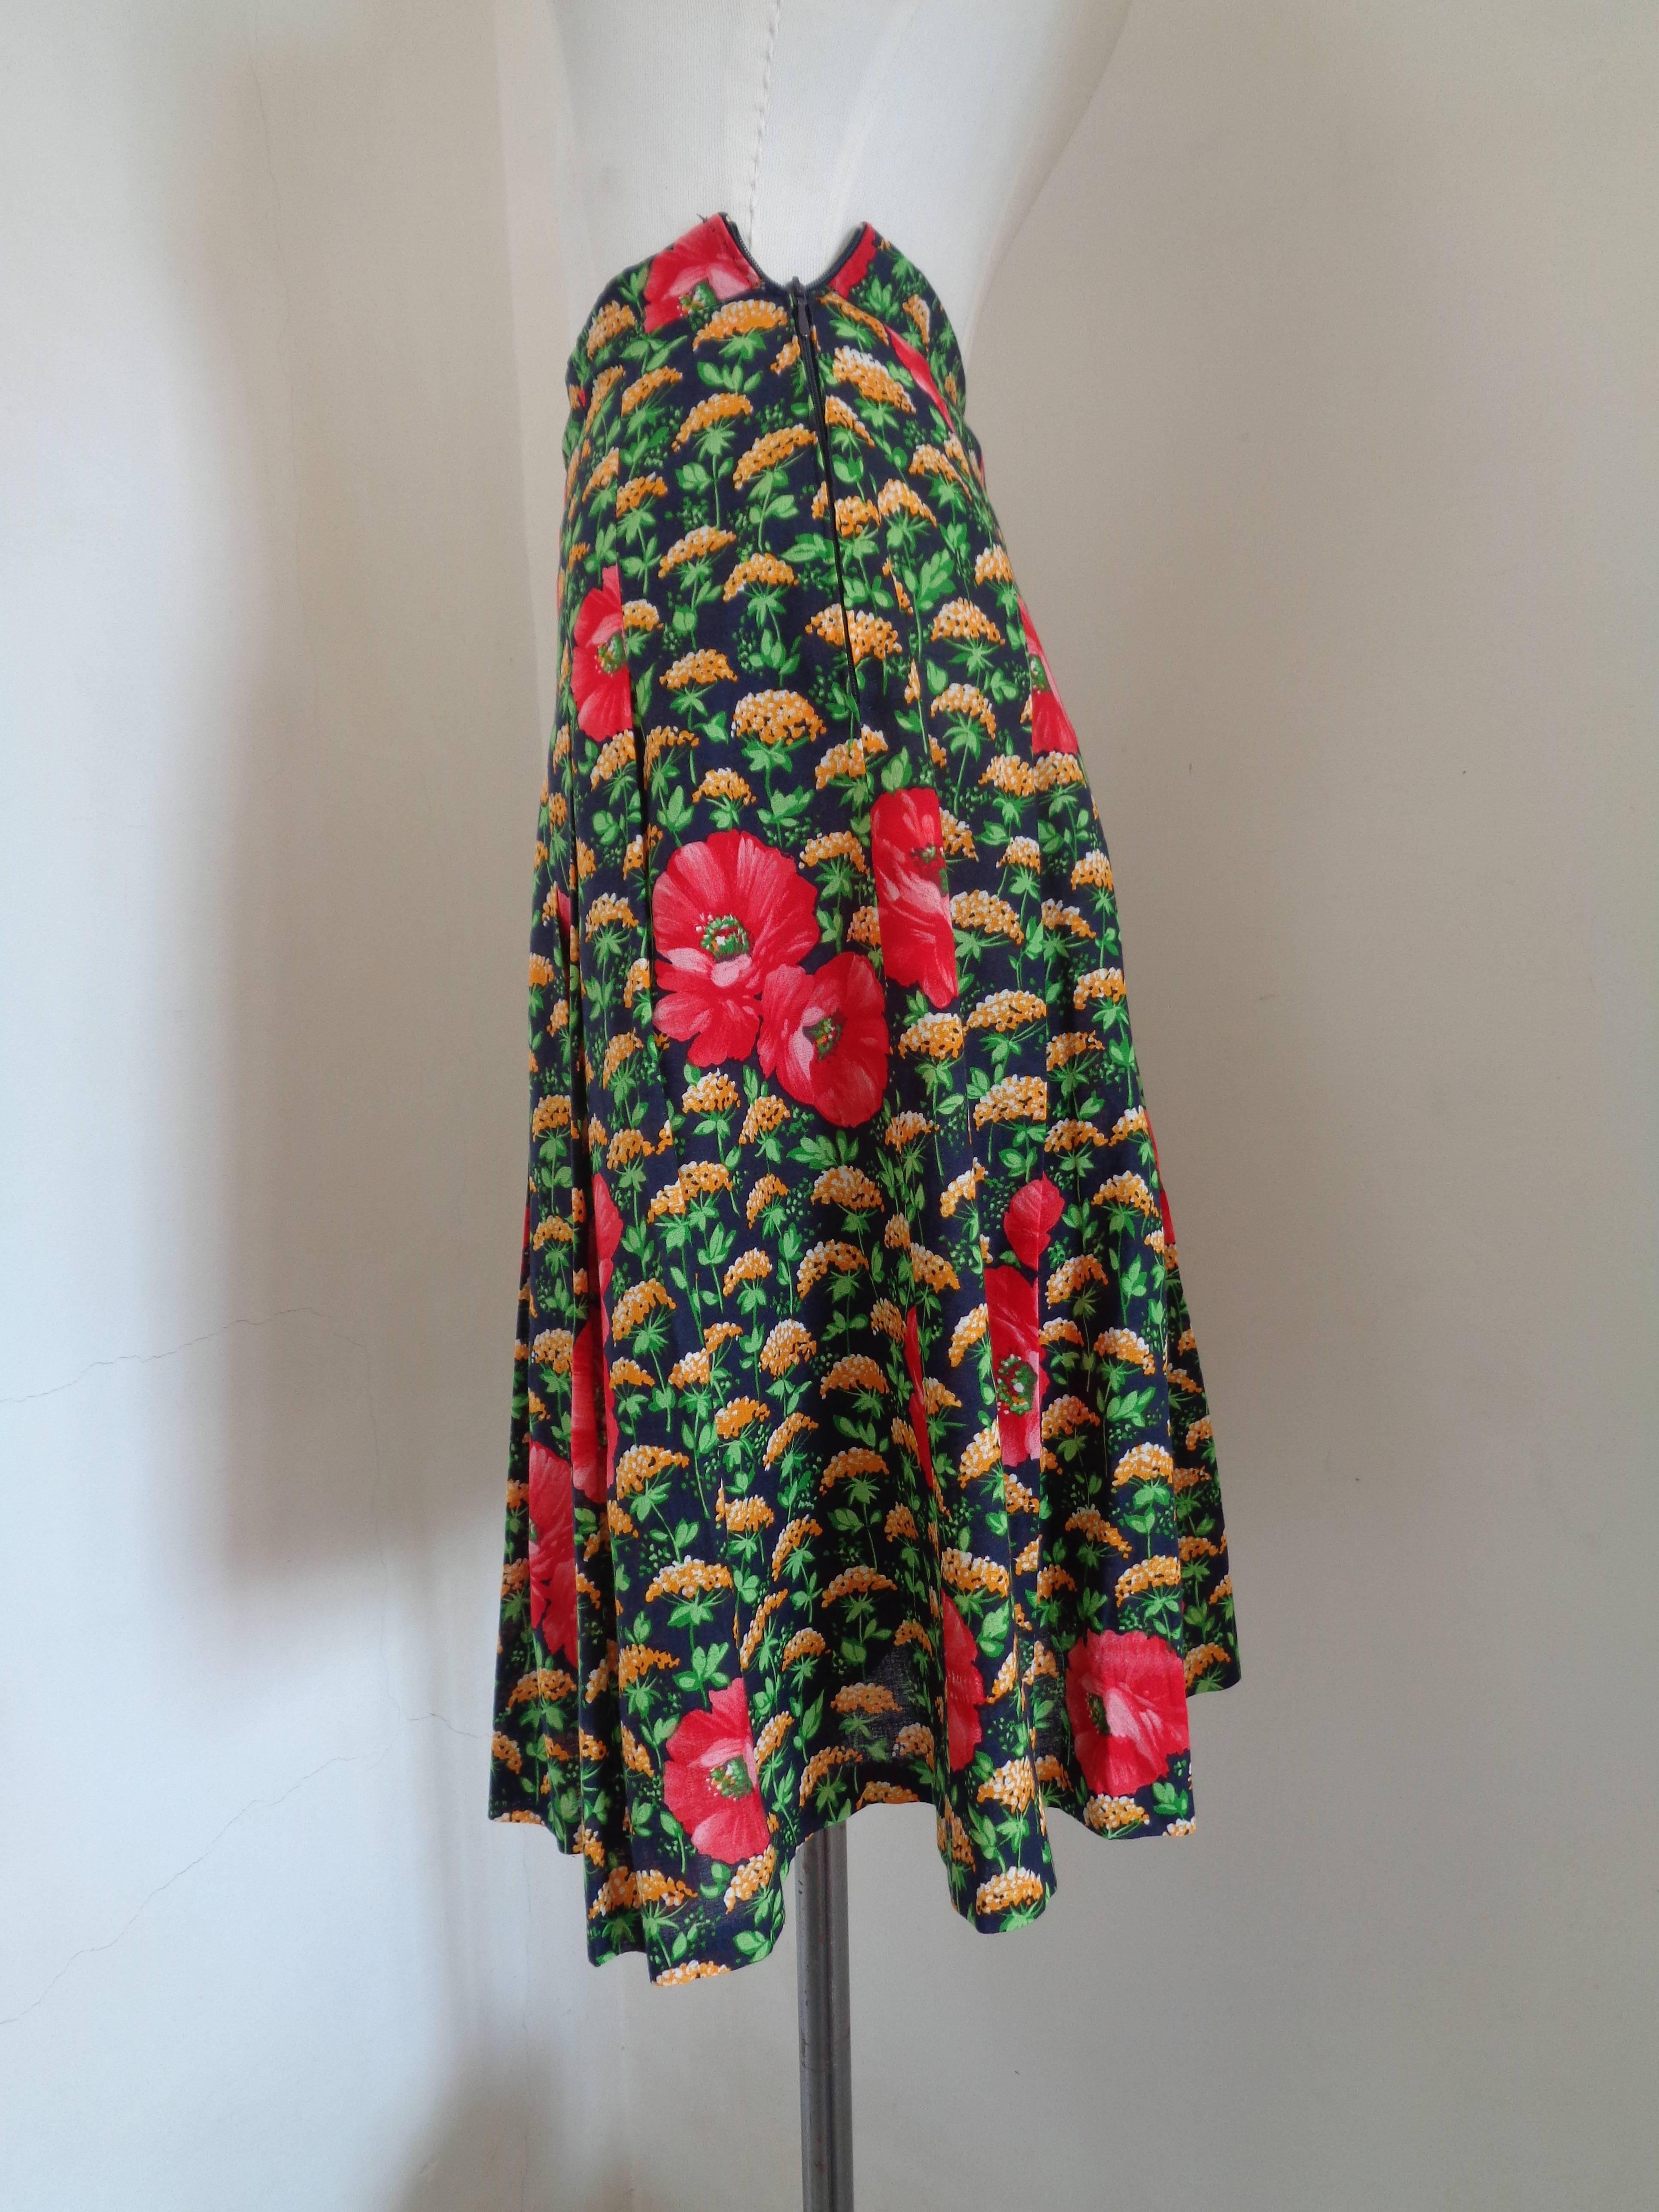 1970s Vintage Green Flowers Skirt

Totally made in italy